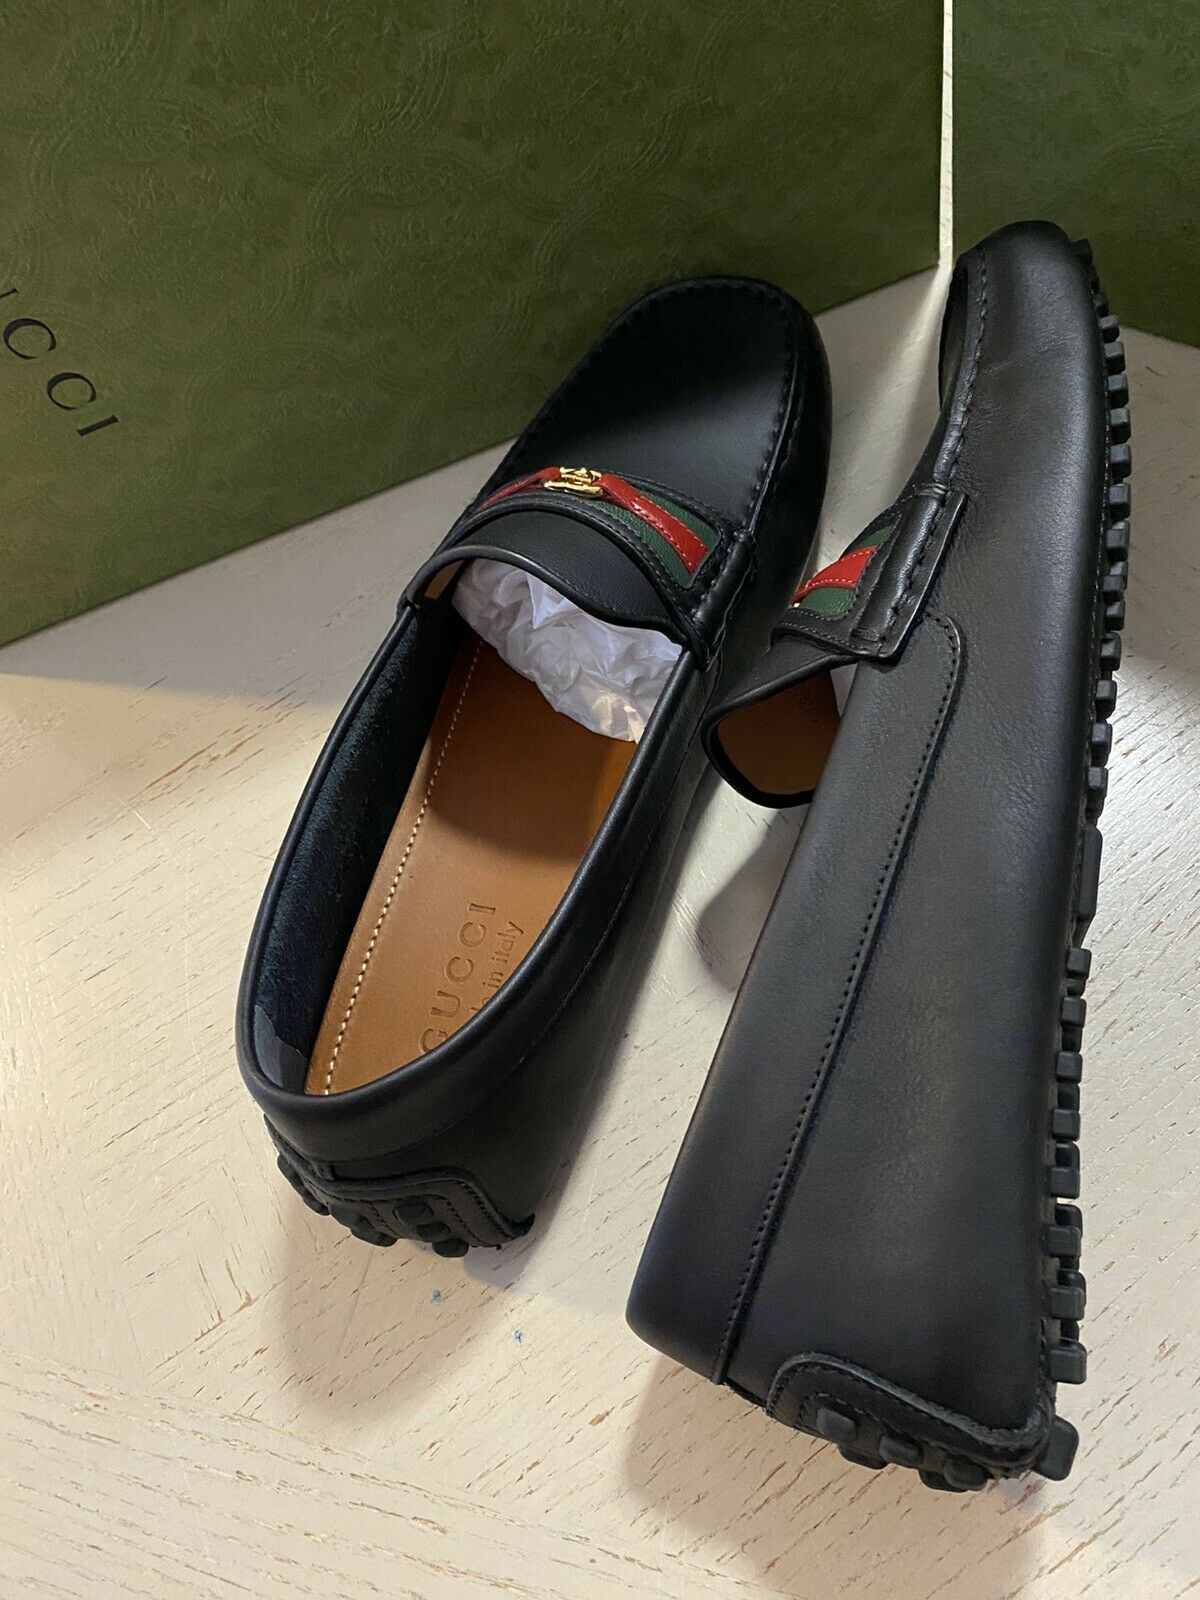 New Gucci Men’s GG Leather Driver Loafers Shoes Black 9 US ( 10 UK ) Italy